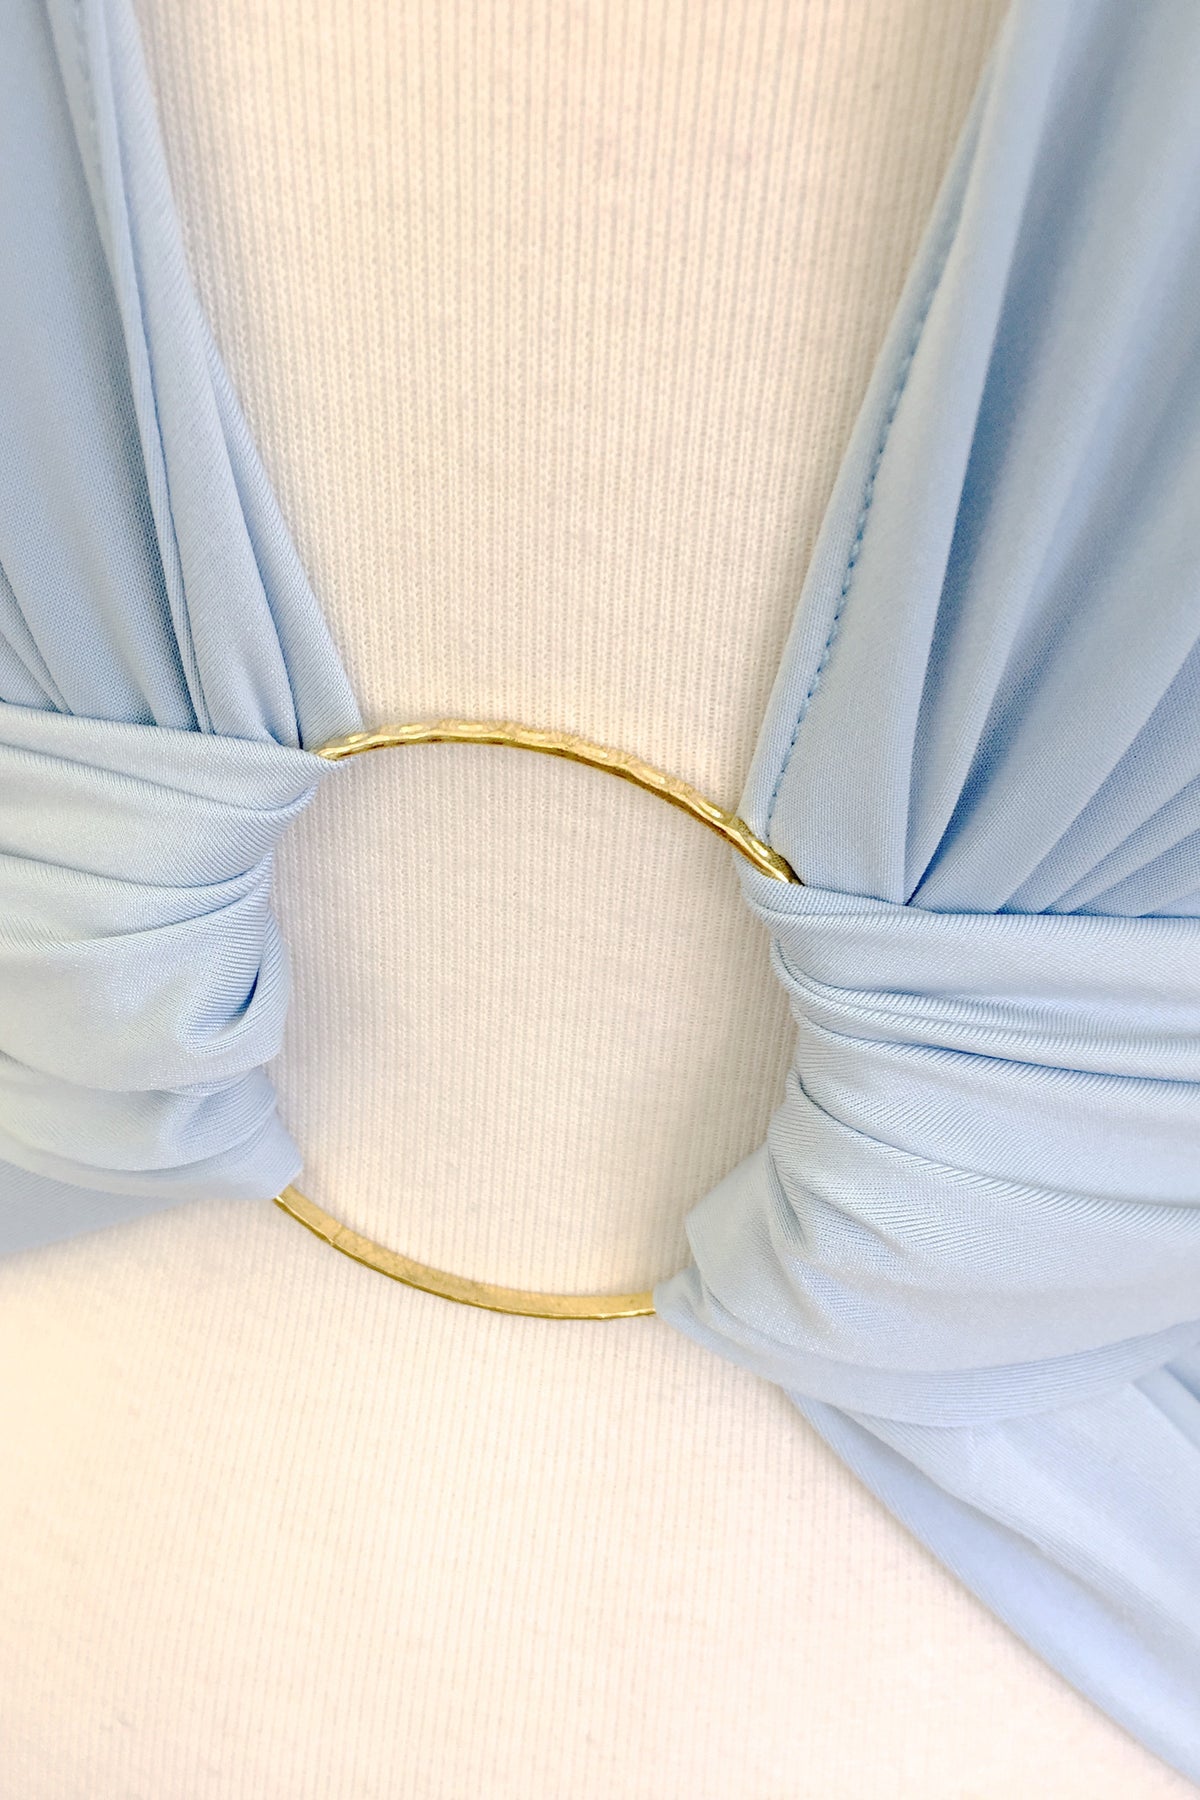 Gold  Bangle Bracelet with Wrap Top